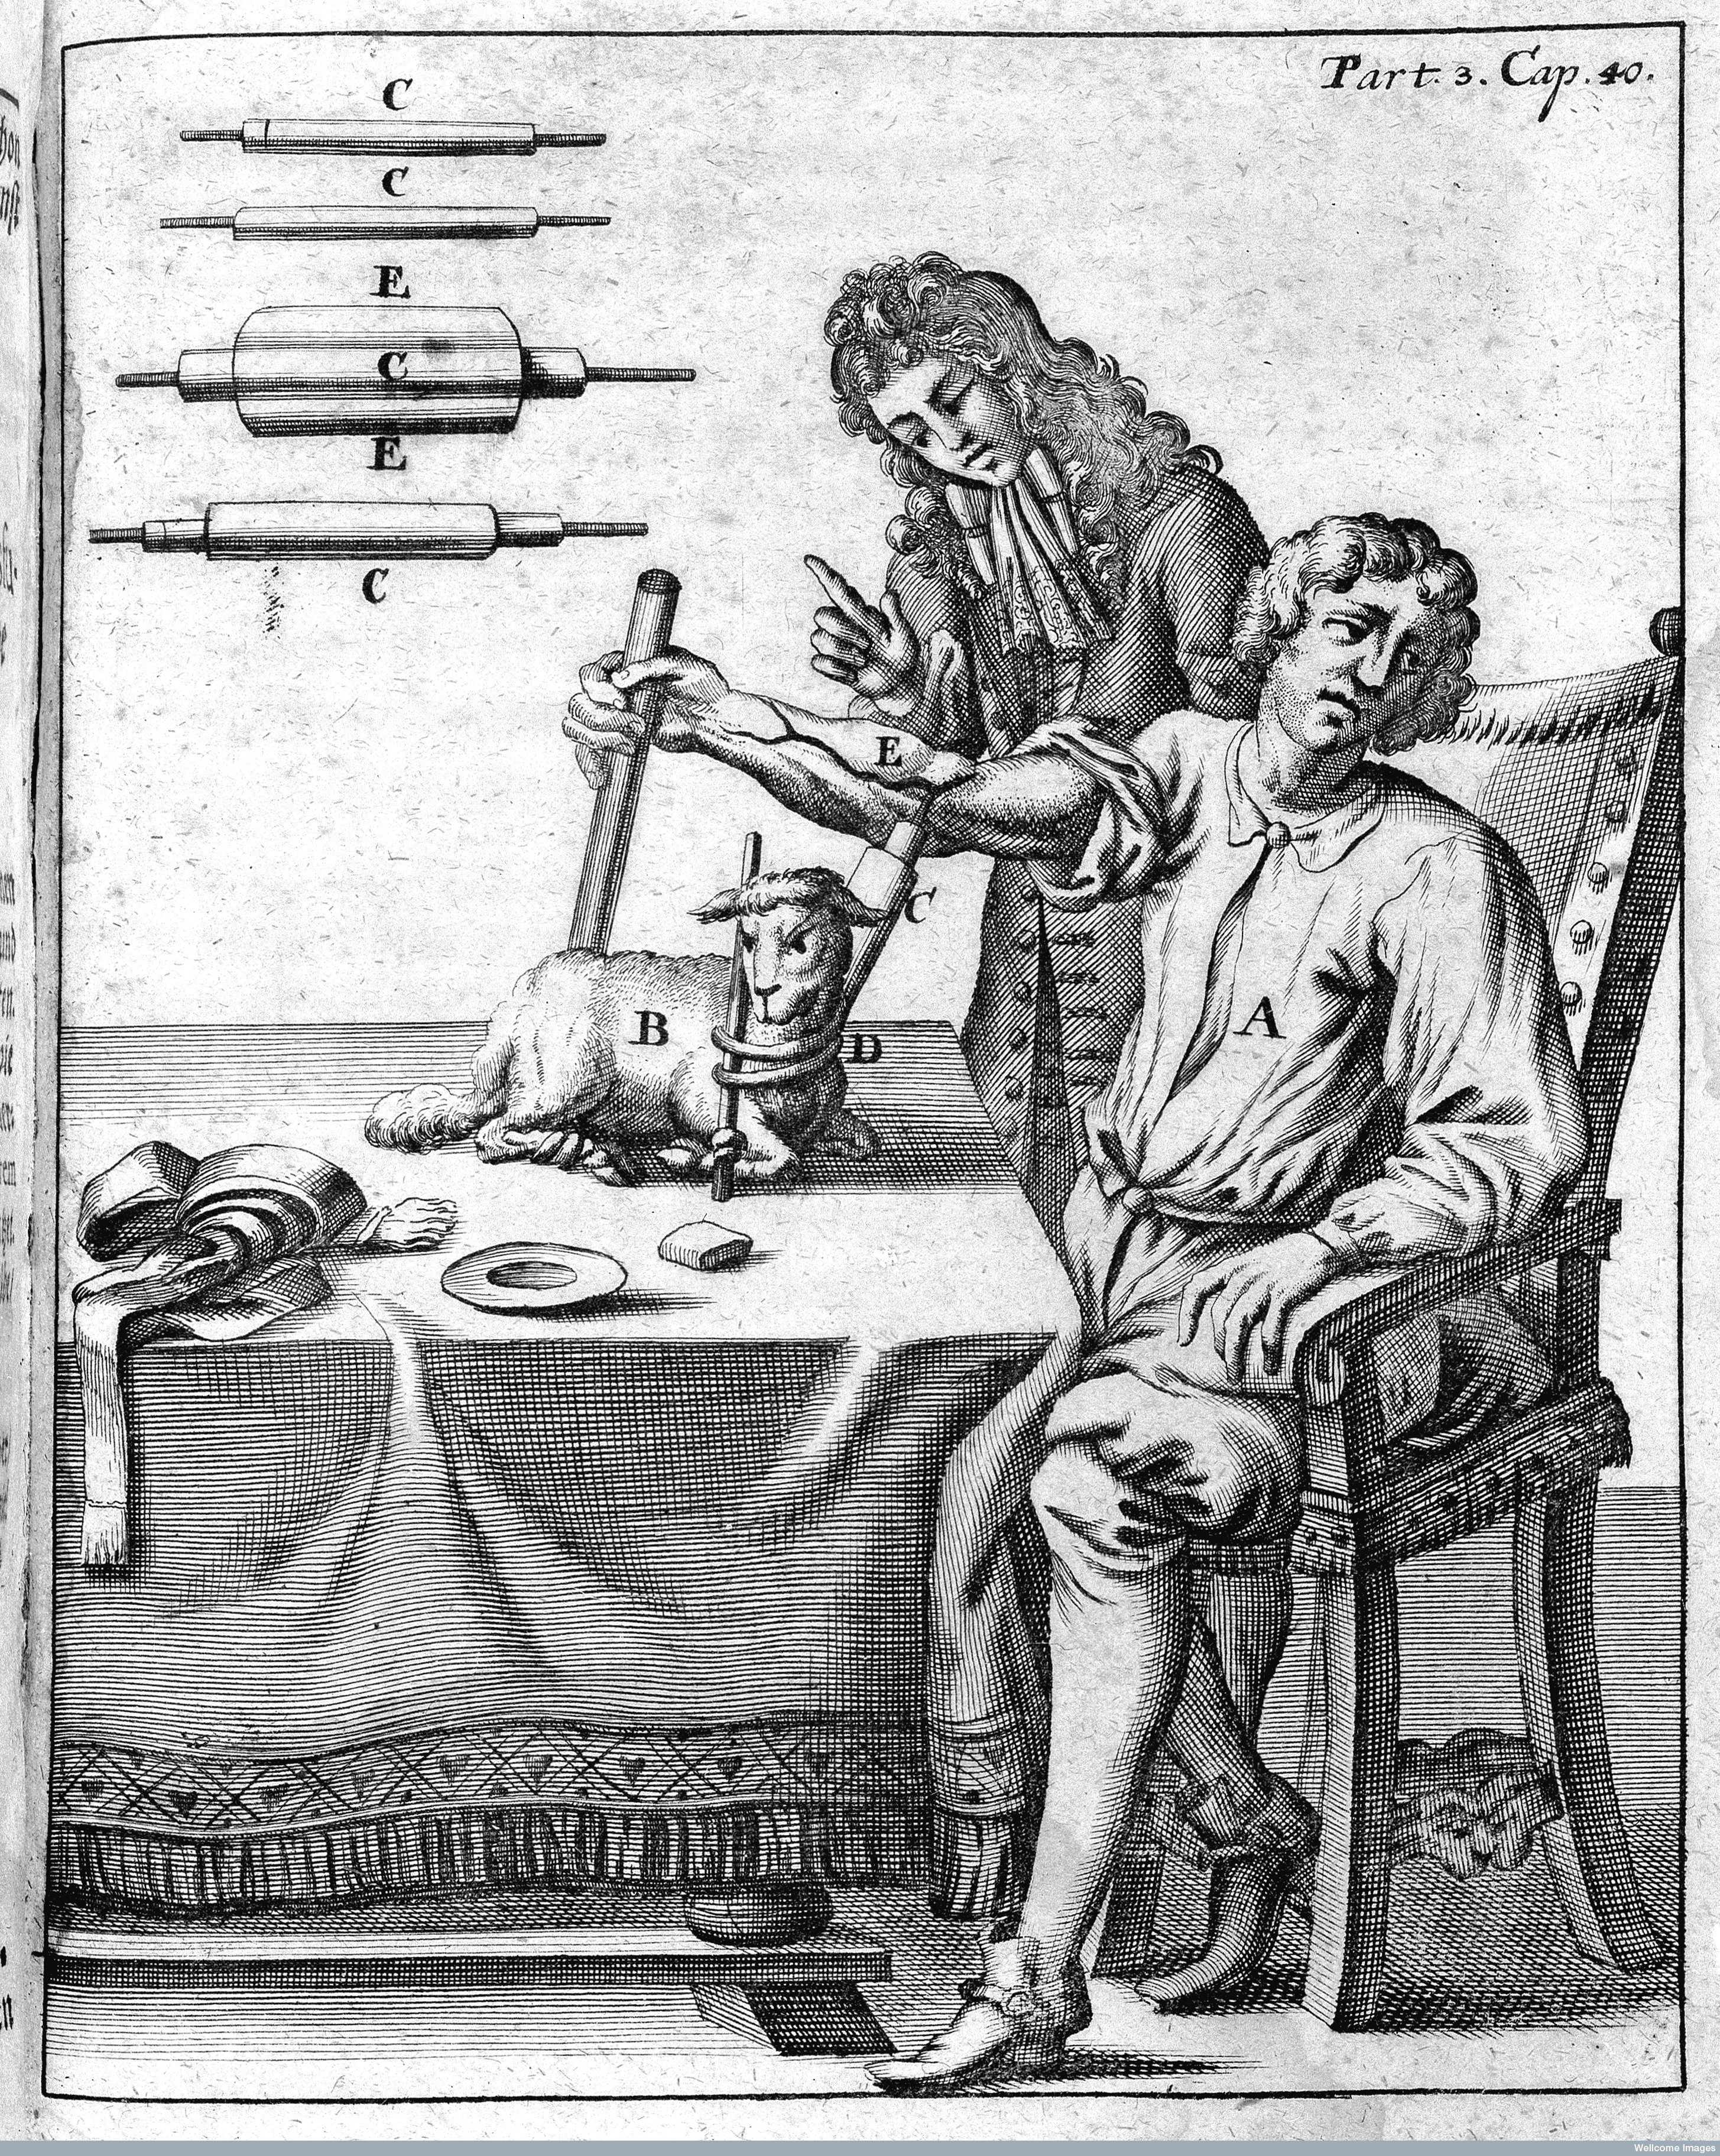 L0000096 A early blood transfusion from lamb to man Credit: Wellcome Library, London. Wellcome Images images@wellcome.ac.uk http://wellcomeimages.org A early blood transfusion from lamb to man. 1705 Grosser und gantz neugewundener Lorbeer-Krantz, oder Wund Artzney ... Zum andern Mahl vermehrt heraus gegeben / Matthias Gottfried Purmann Published: 1705. Copyrighted work available under Creative Commons Attribution only licence CC BY 4.0 http://creativecommons.org/licenses/by/4.0/